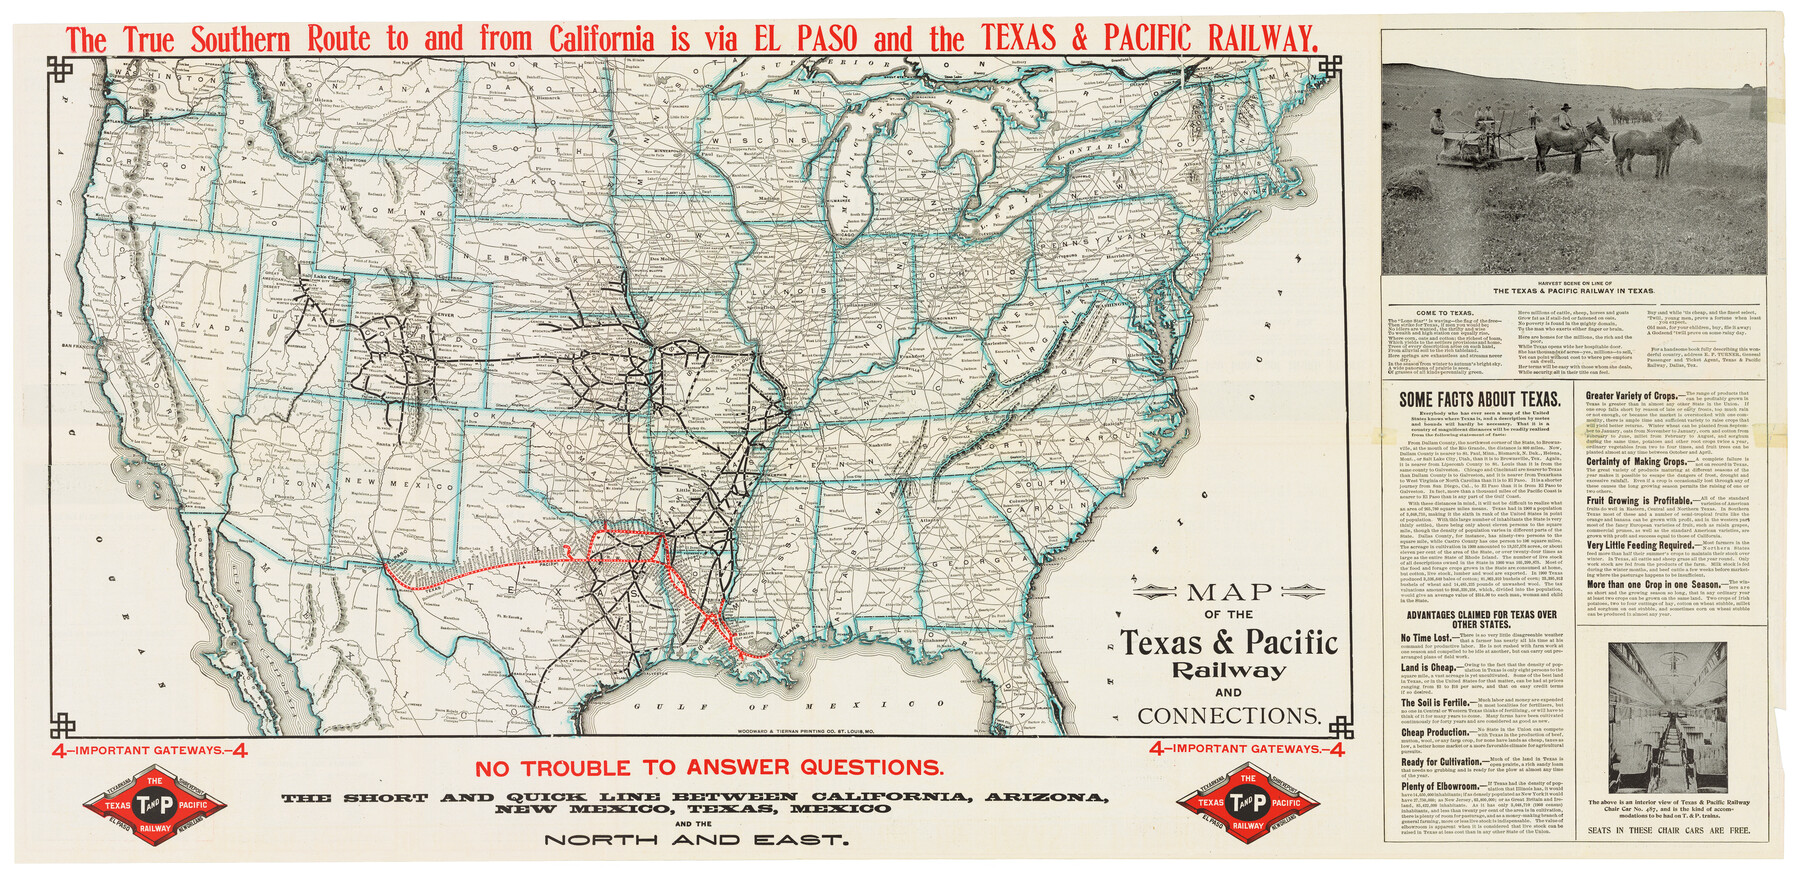 95770, Map of the Texas & Pacific Railway and connections, Cobb Digital Map Collection - 1